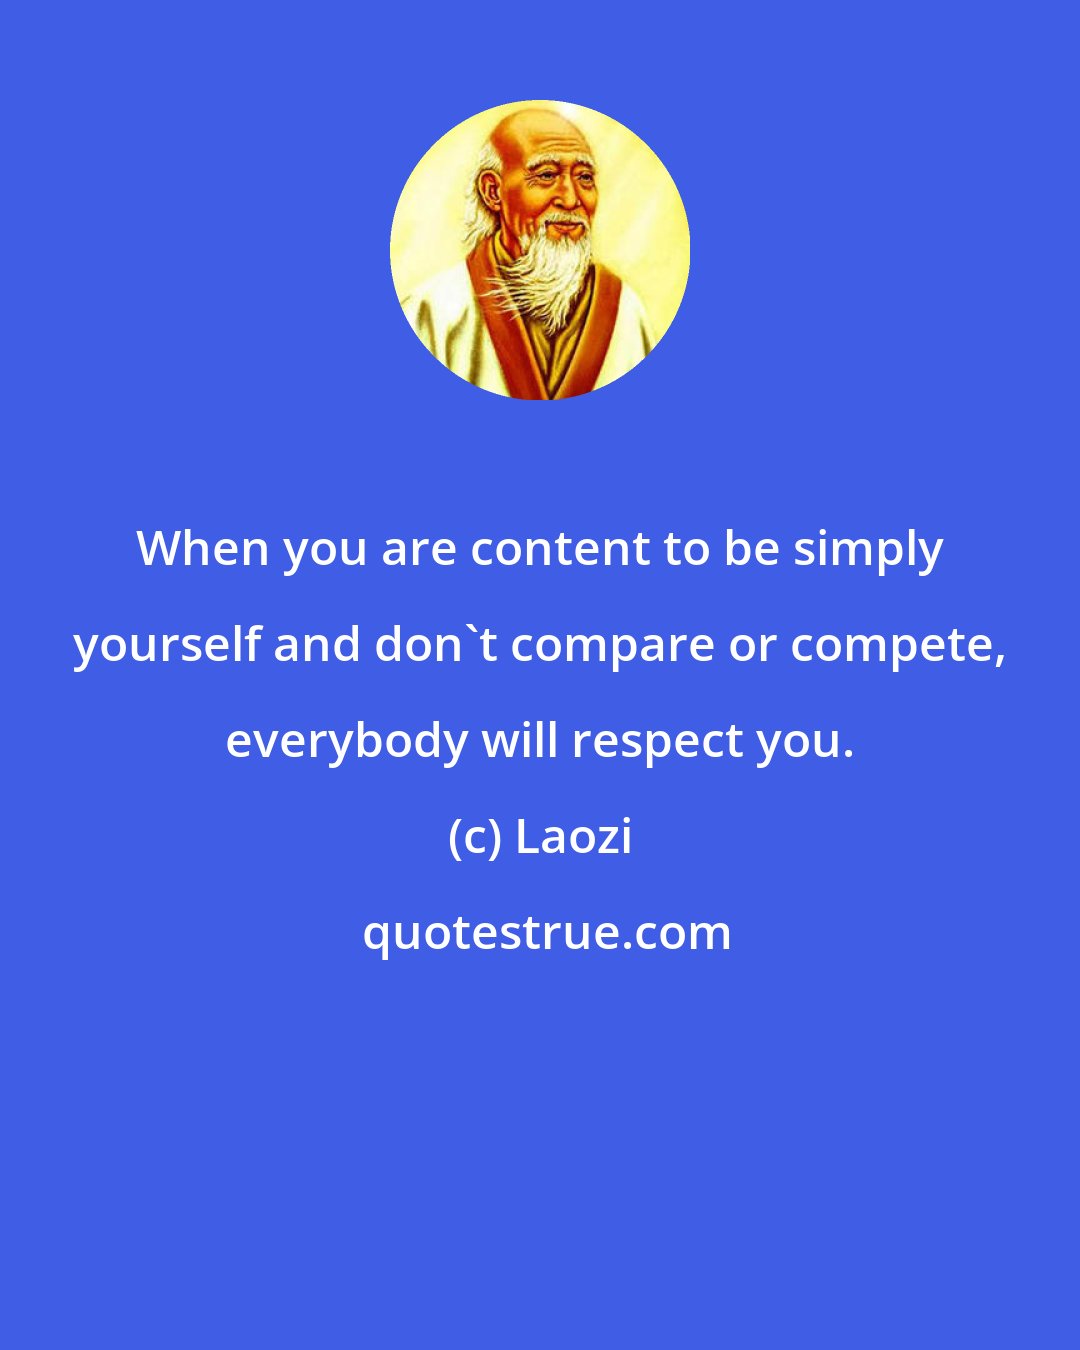 Laozi: When you are content to be simply yourself and don't compare or compete, everybody will respect you.